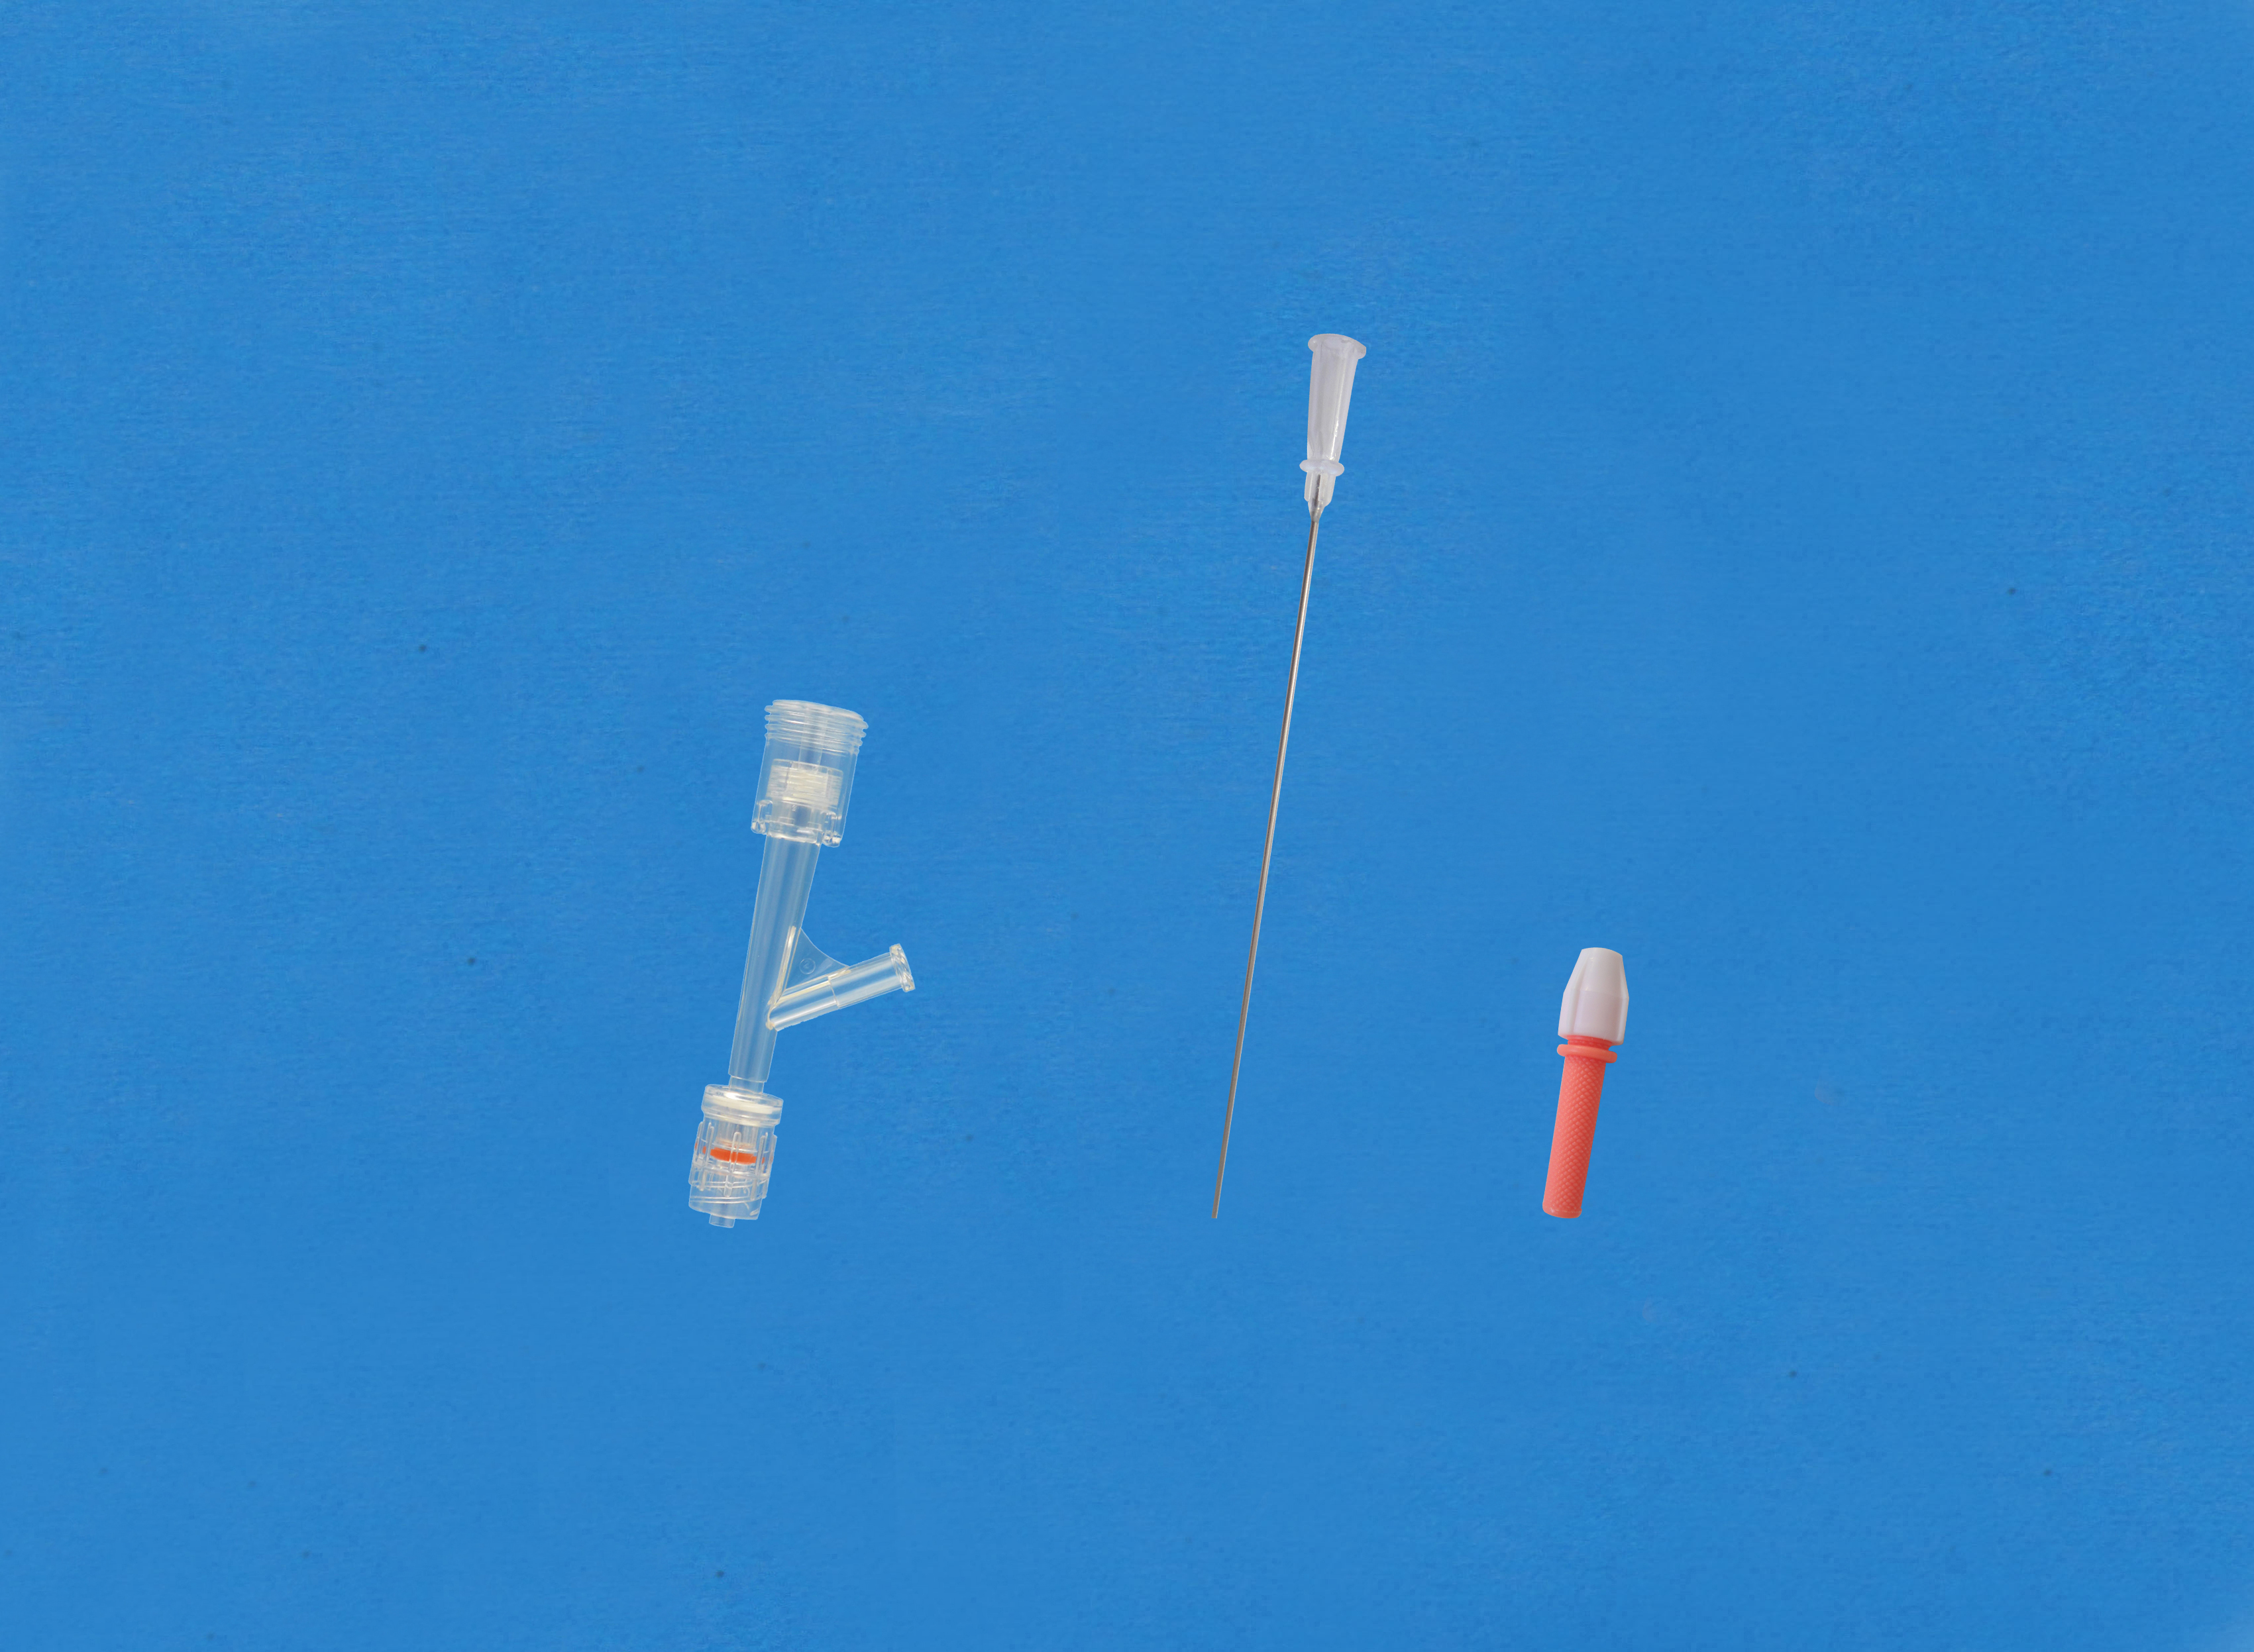 Haemostatic valves, Push-pull, Sideon Female Luer, Insertion Tool with Small Hub, Red/Copper Torquer